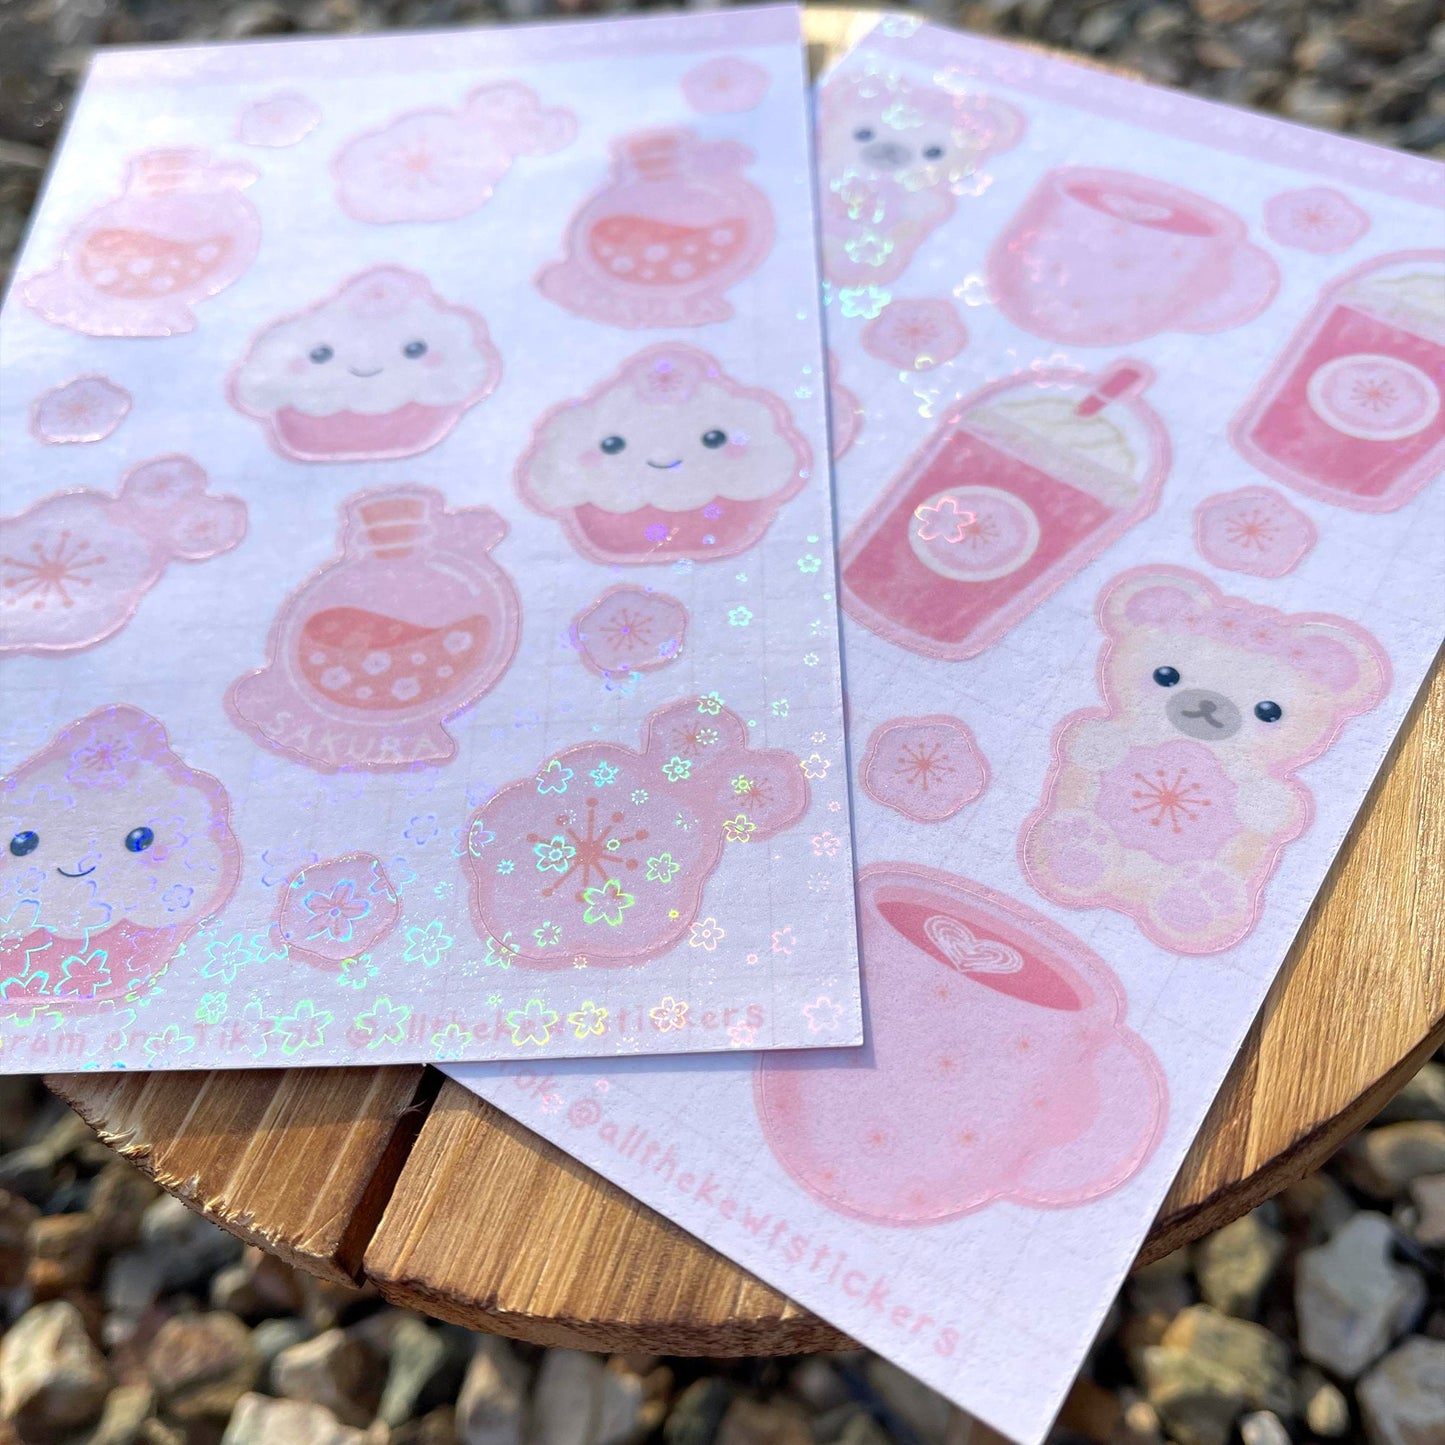 Cherry Blossom Kawaii Sticker Sheets, Cute Bear Stickers, Coffee Stickers, Sakura Cupcakes, Cherry Blossom Holographic or Matte Stickers